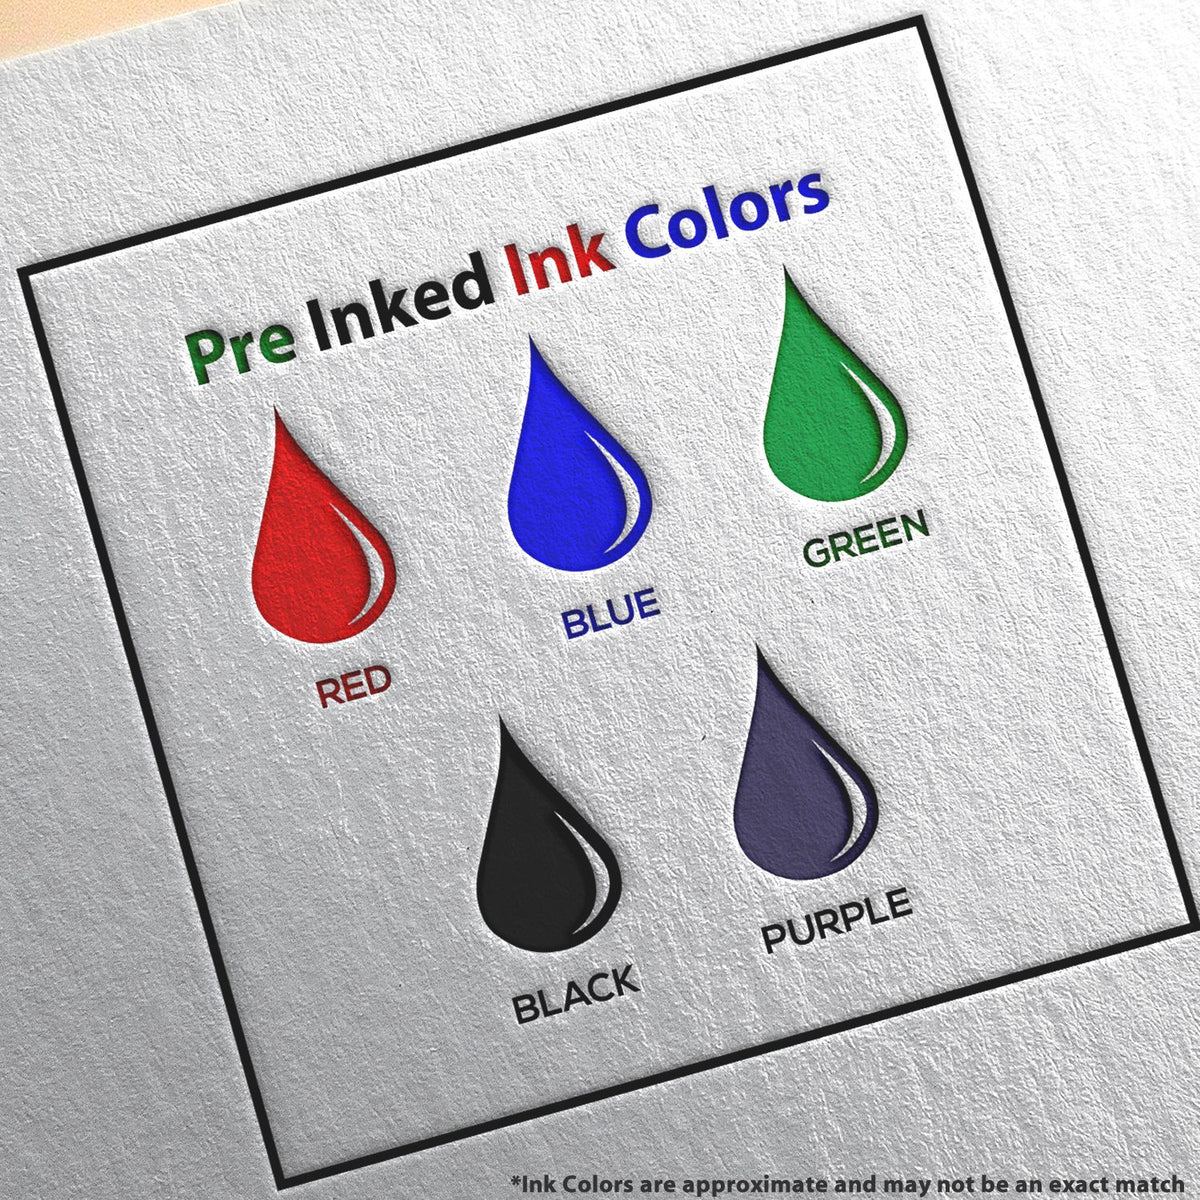 A picture showing the different ink colors or hues available for the MaxLight Premium Pre-Inked Nebraska State Seal Notarial Stamp product.